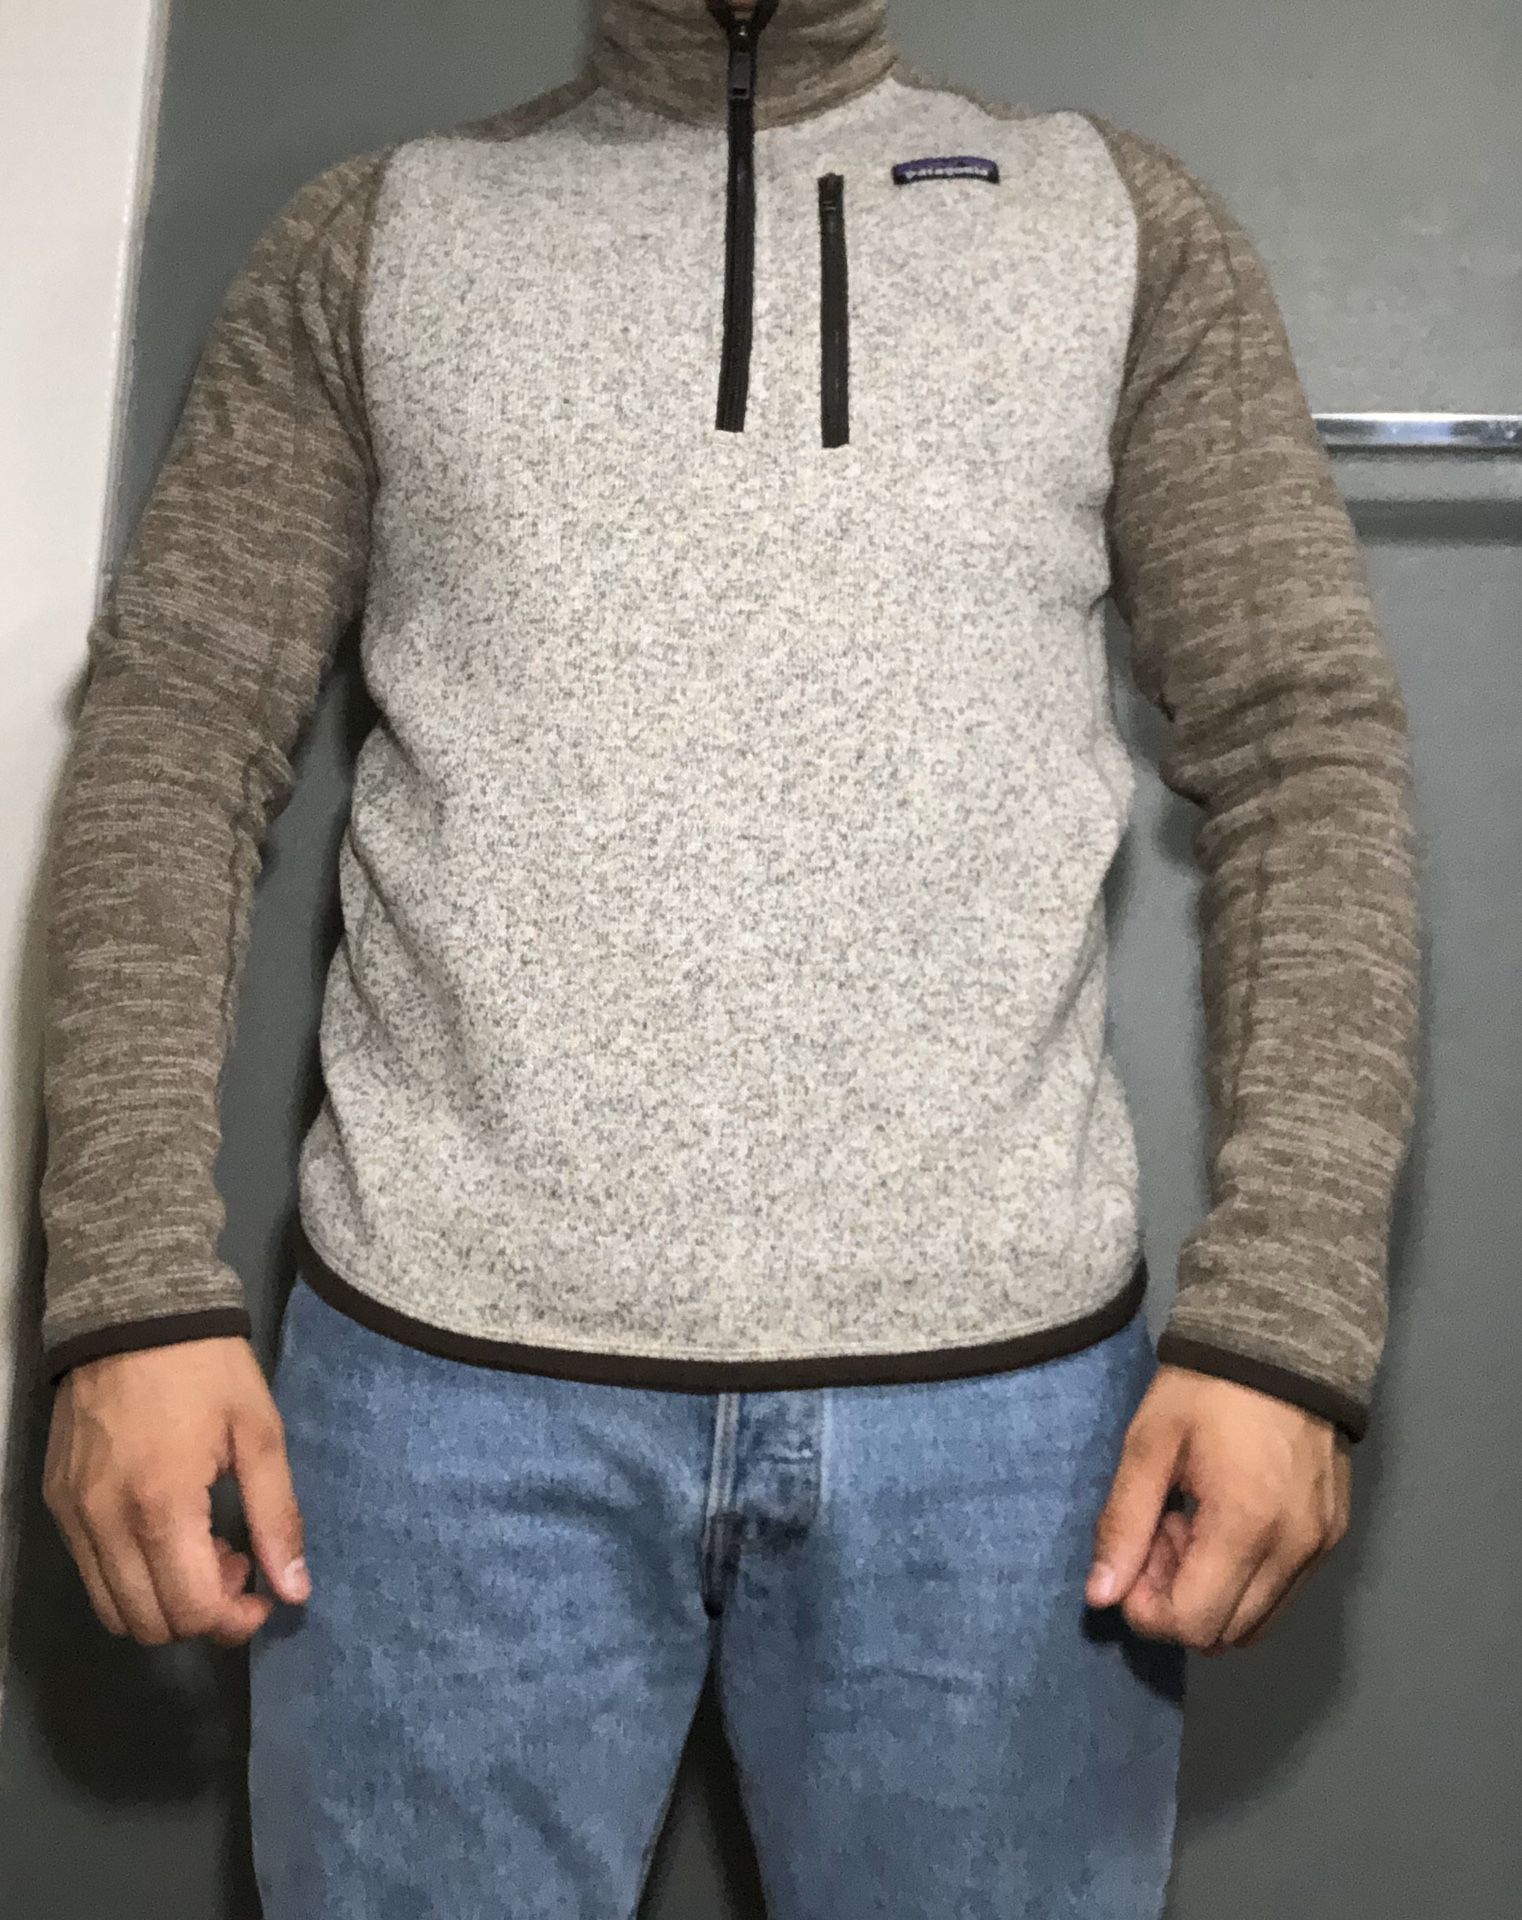 Patagonia better sweater